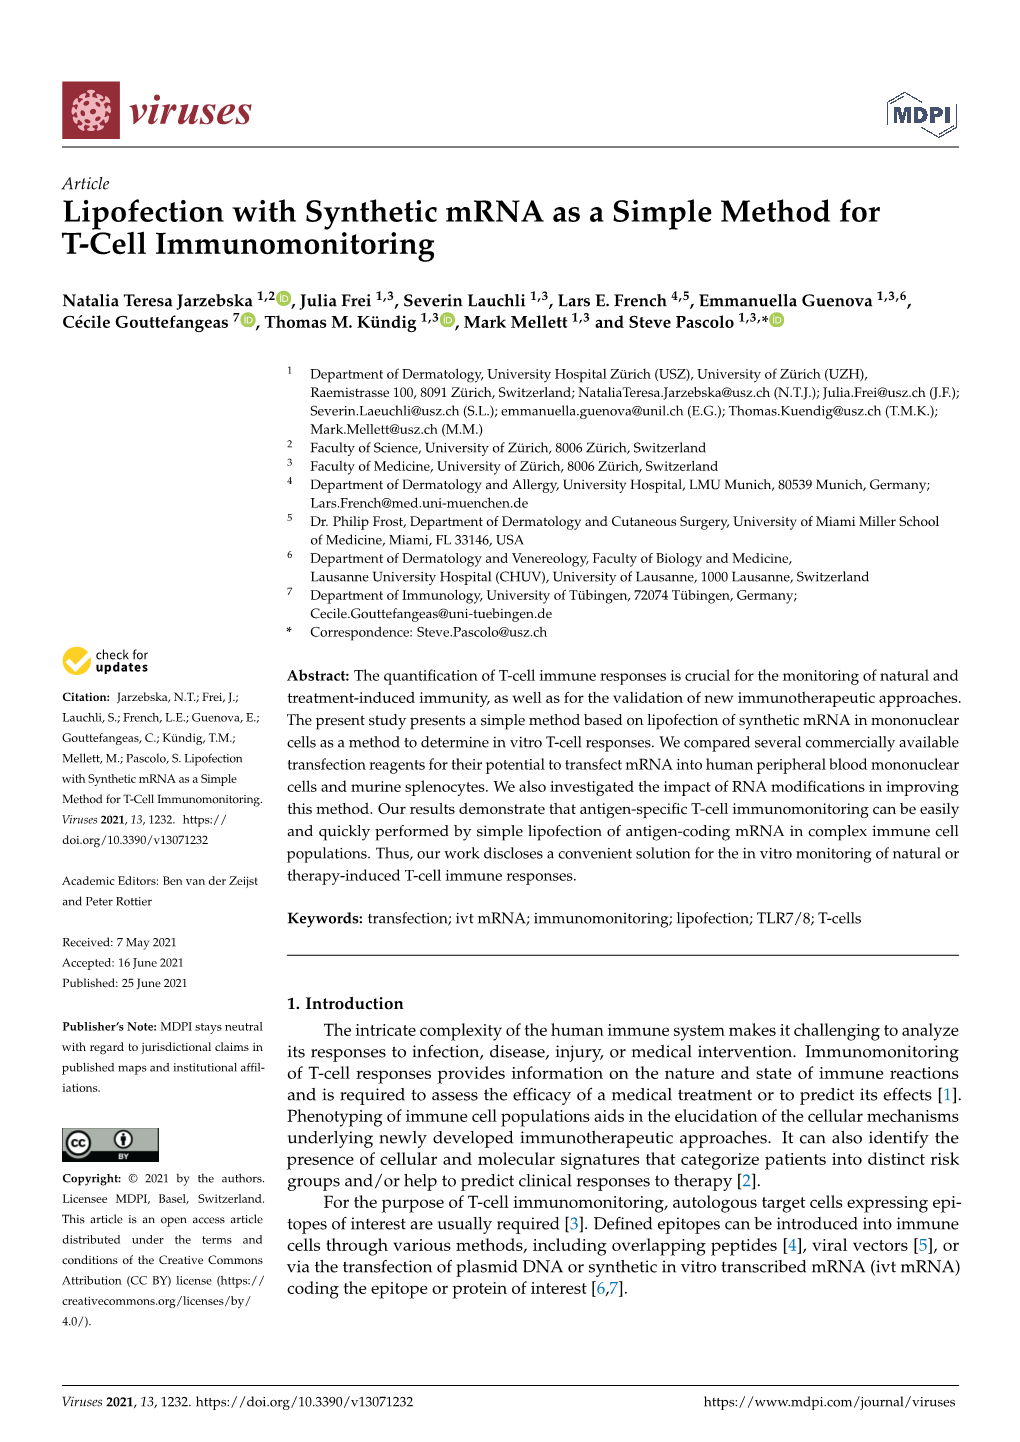 Lipofection with Synthetic Mrna As a Simple Method for T-Cell Immunomonitoring